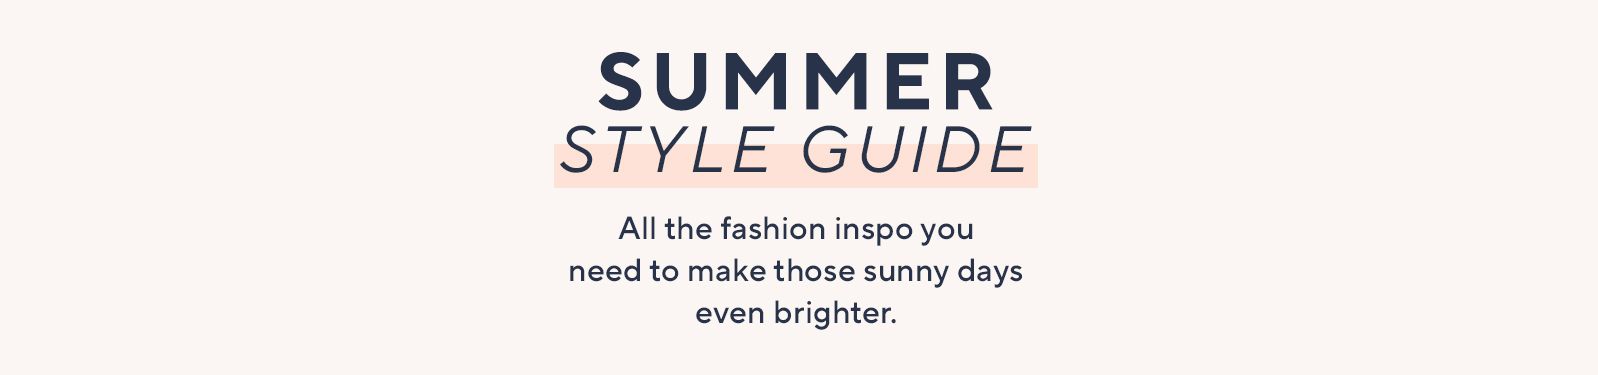 Summer Style Guide. All the fashion inspo you need to make those sunny days even brighter.